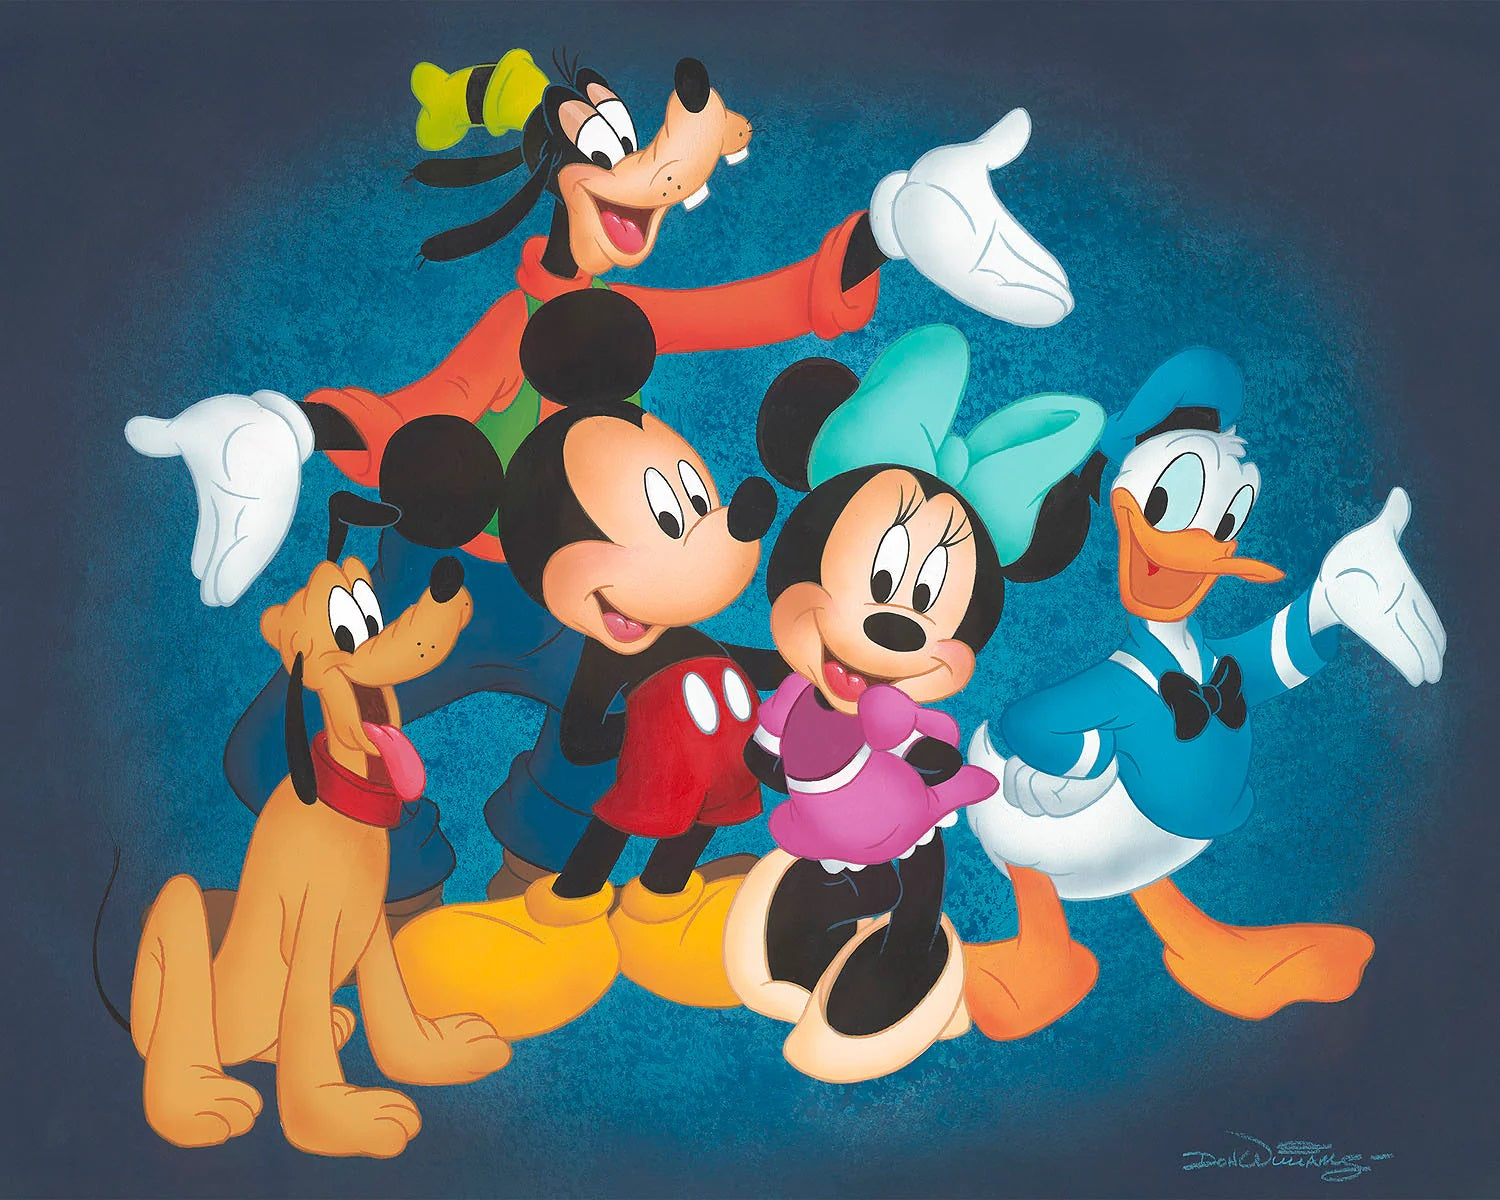 Disney's beloved characters Mickey, Minnie, Goofy, Donald, and Pluto. 